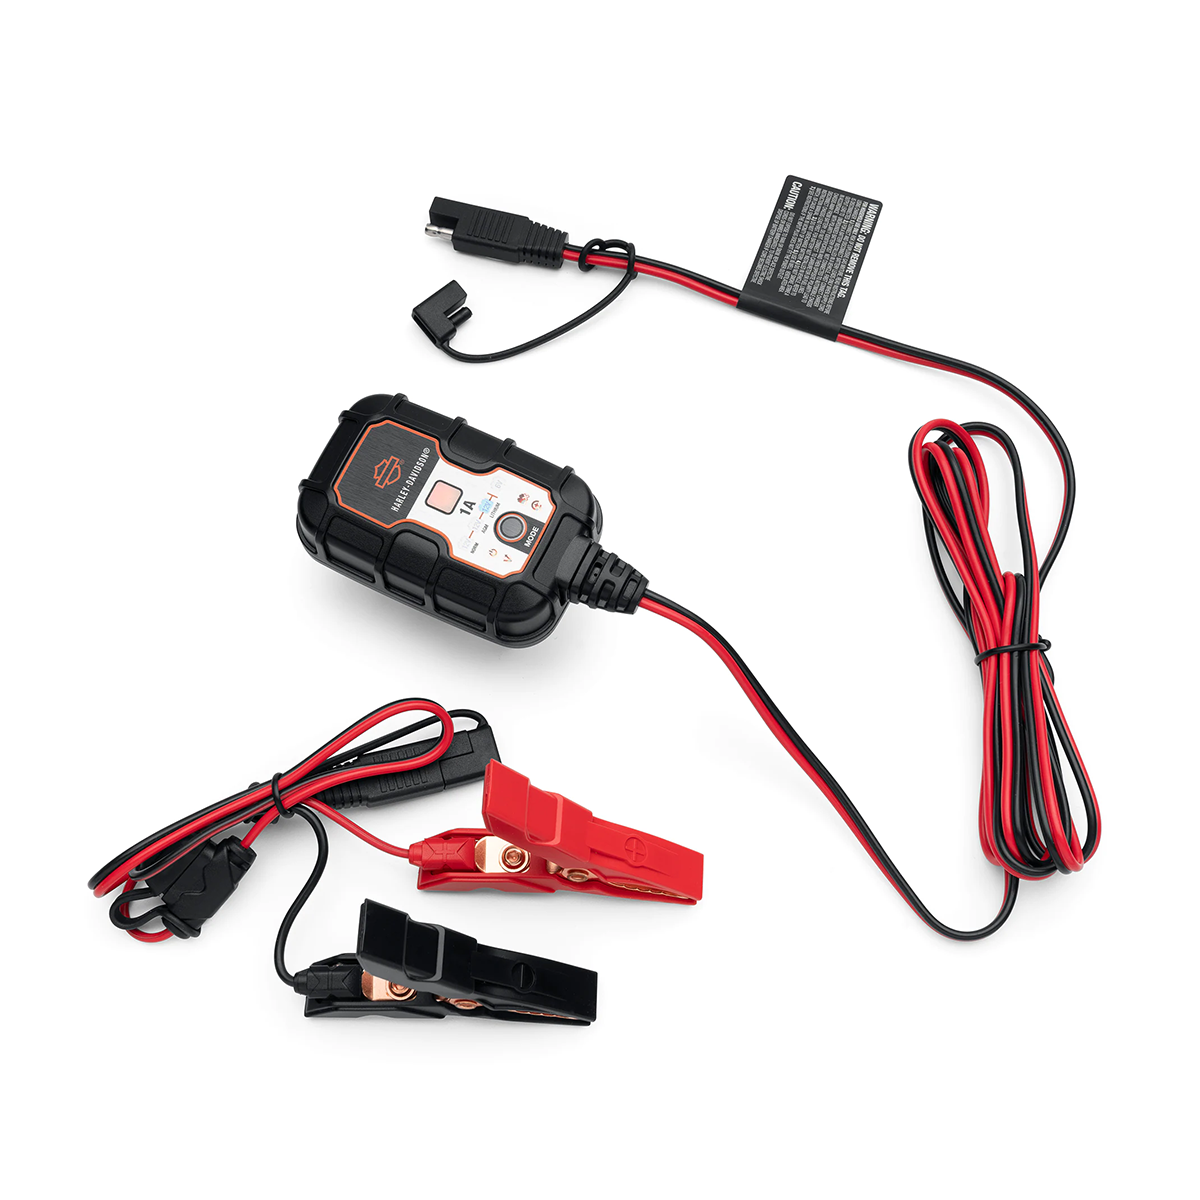 Harley-Davidson 1 Amp Dual-Mode Battery Charger